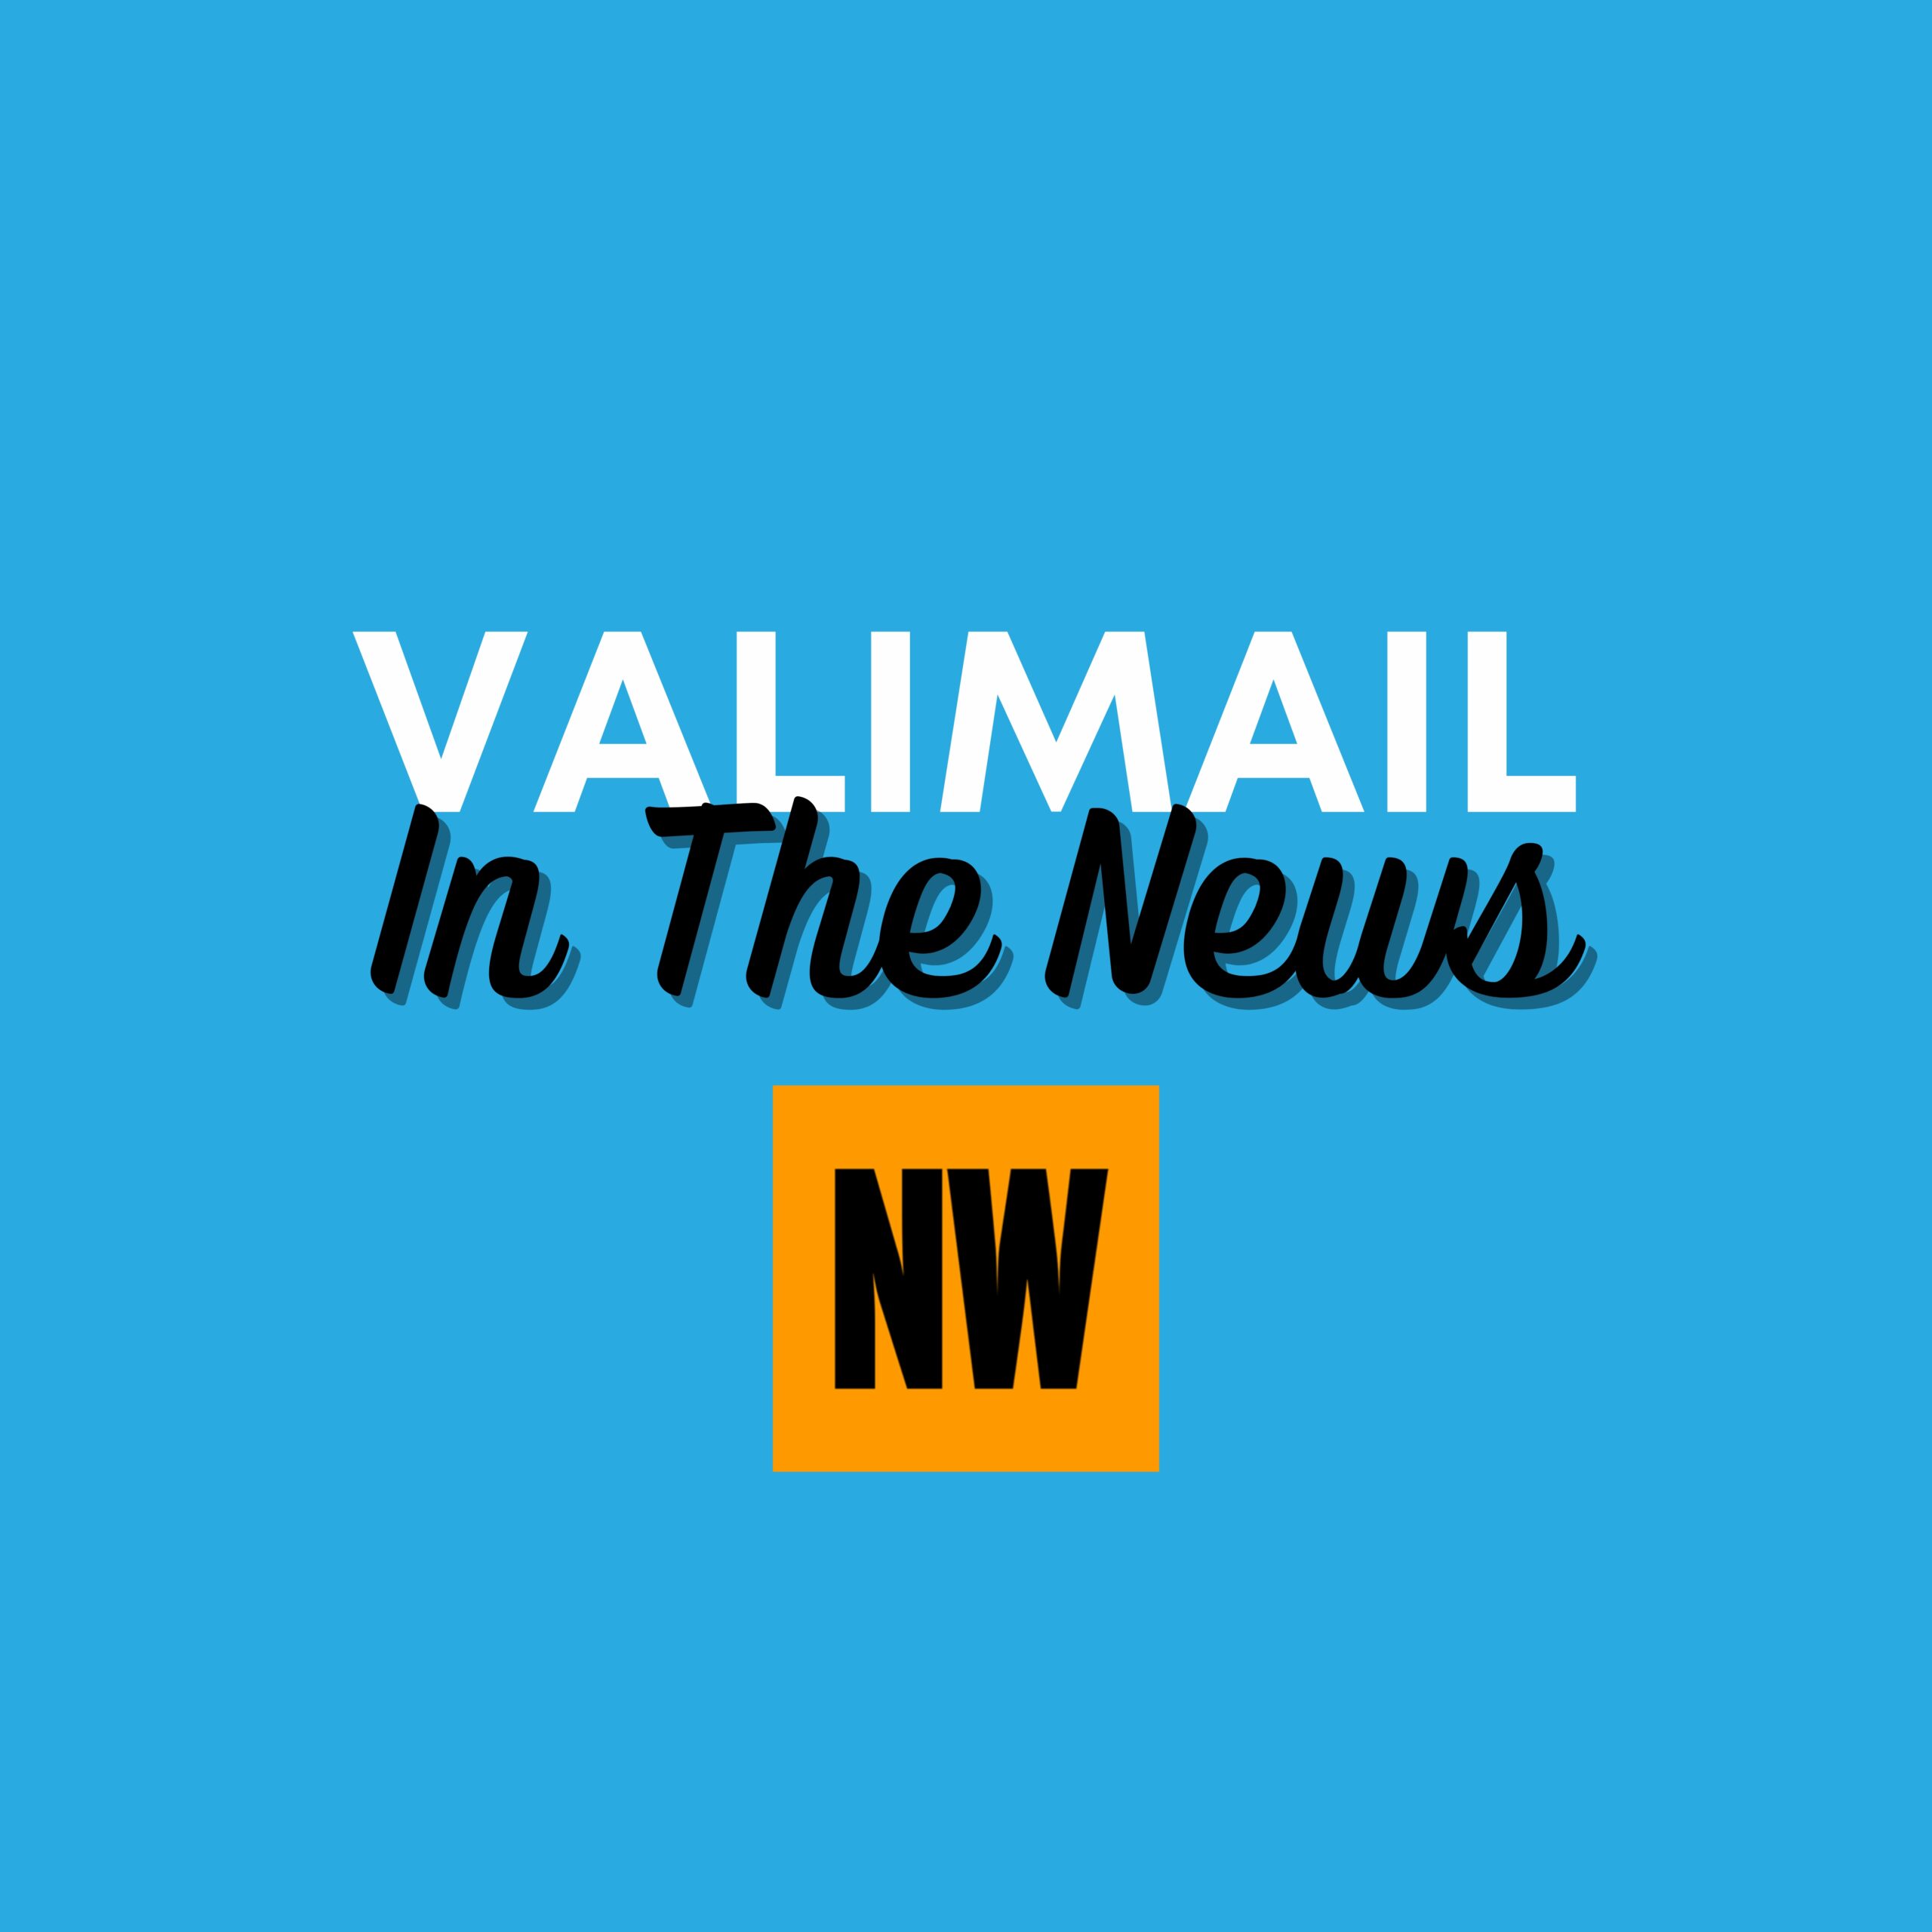 Valimail Featured in Network World